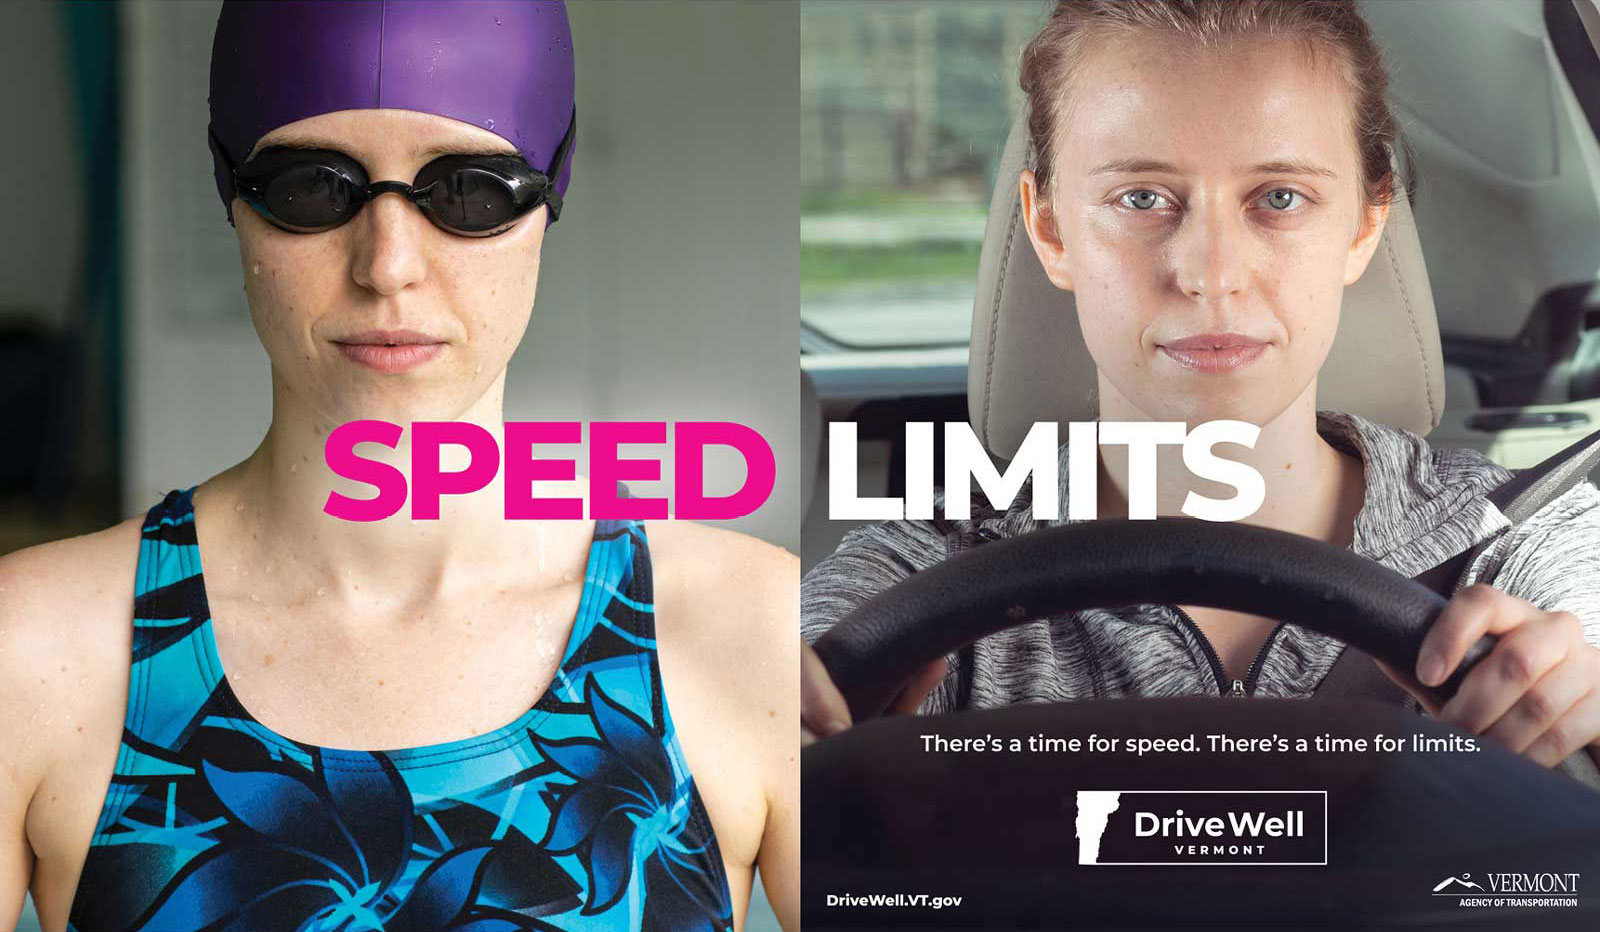 Drivewell - Speed limits 2